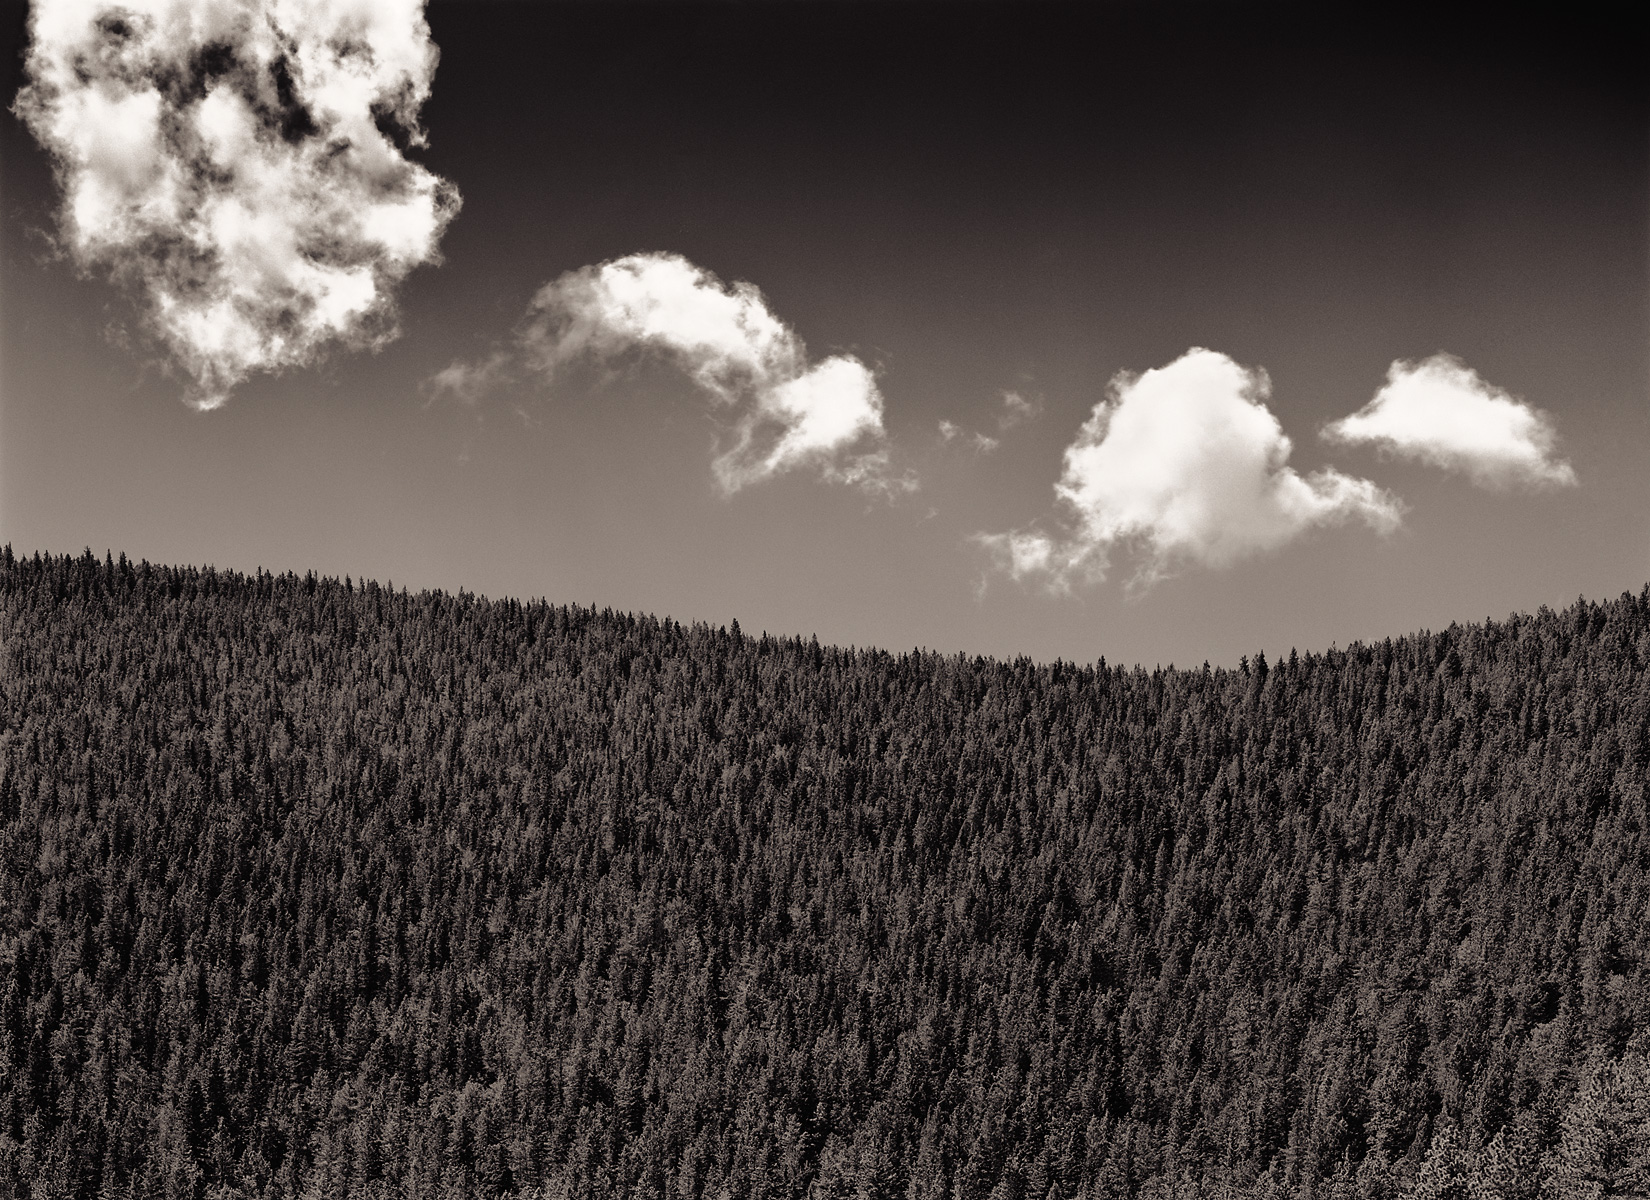 Stephen Austin Welch commercial director & advertising and fine art landscape photographer clouds over fir ridge B&W black and white sepia selenium duo-toned photography: moody and dramatic fine art photographs